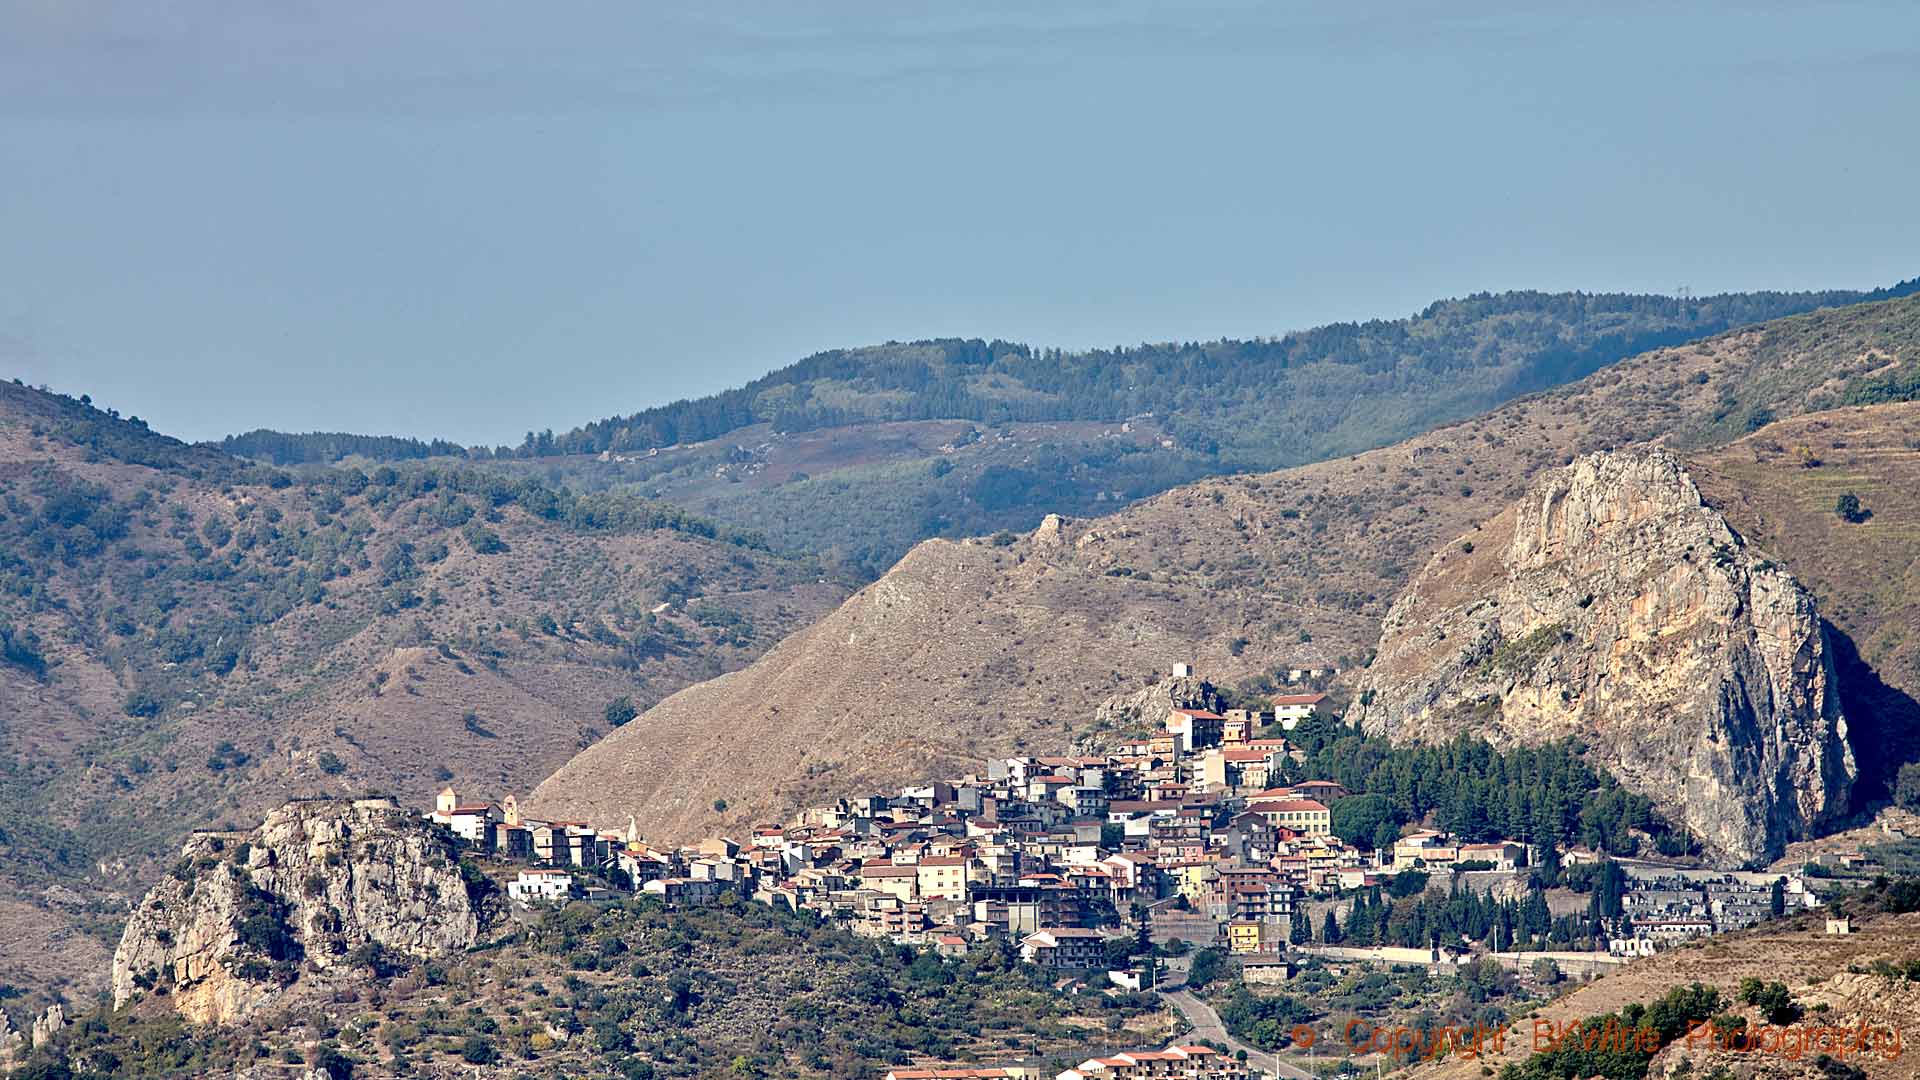 A small village hanging on to the slopes of Etna, Sicily